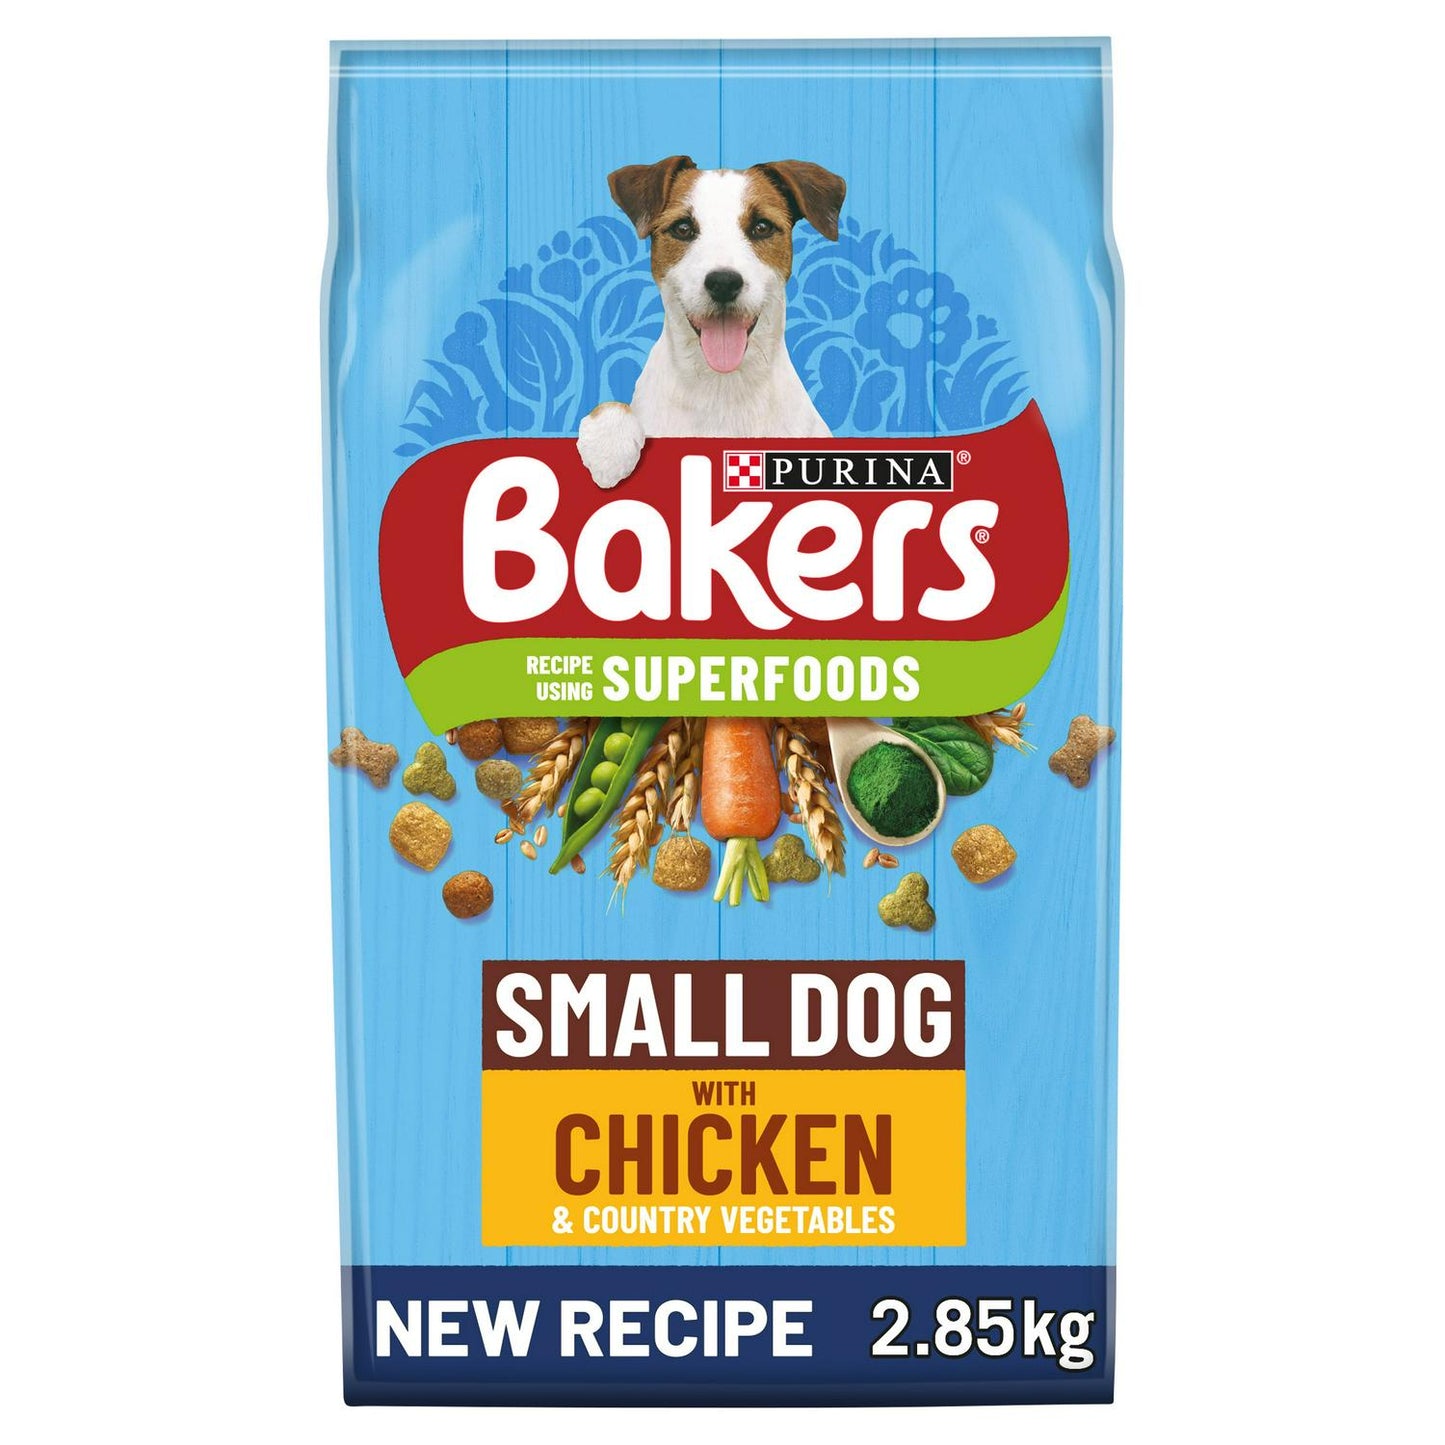 Bakers - Small Dog (2.85kg)